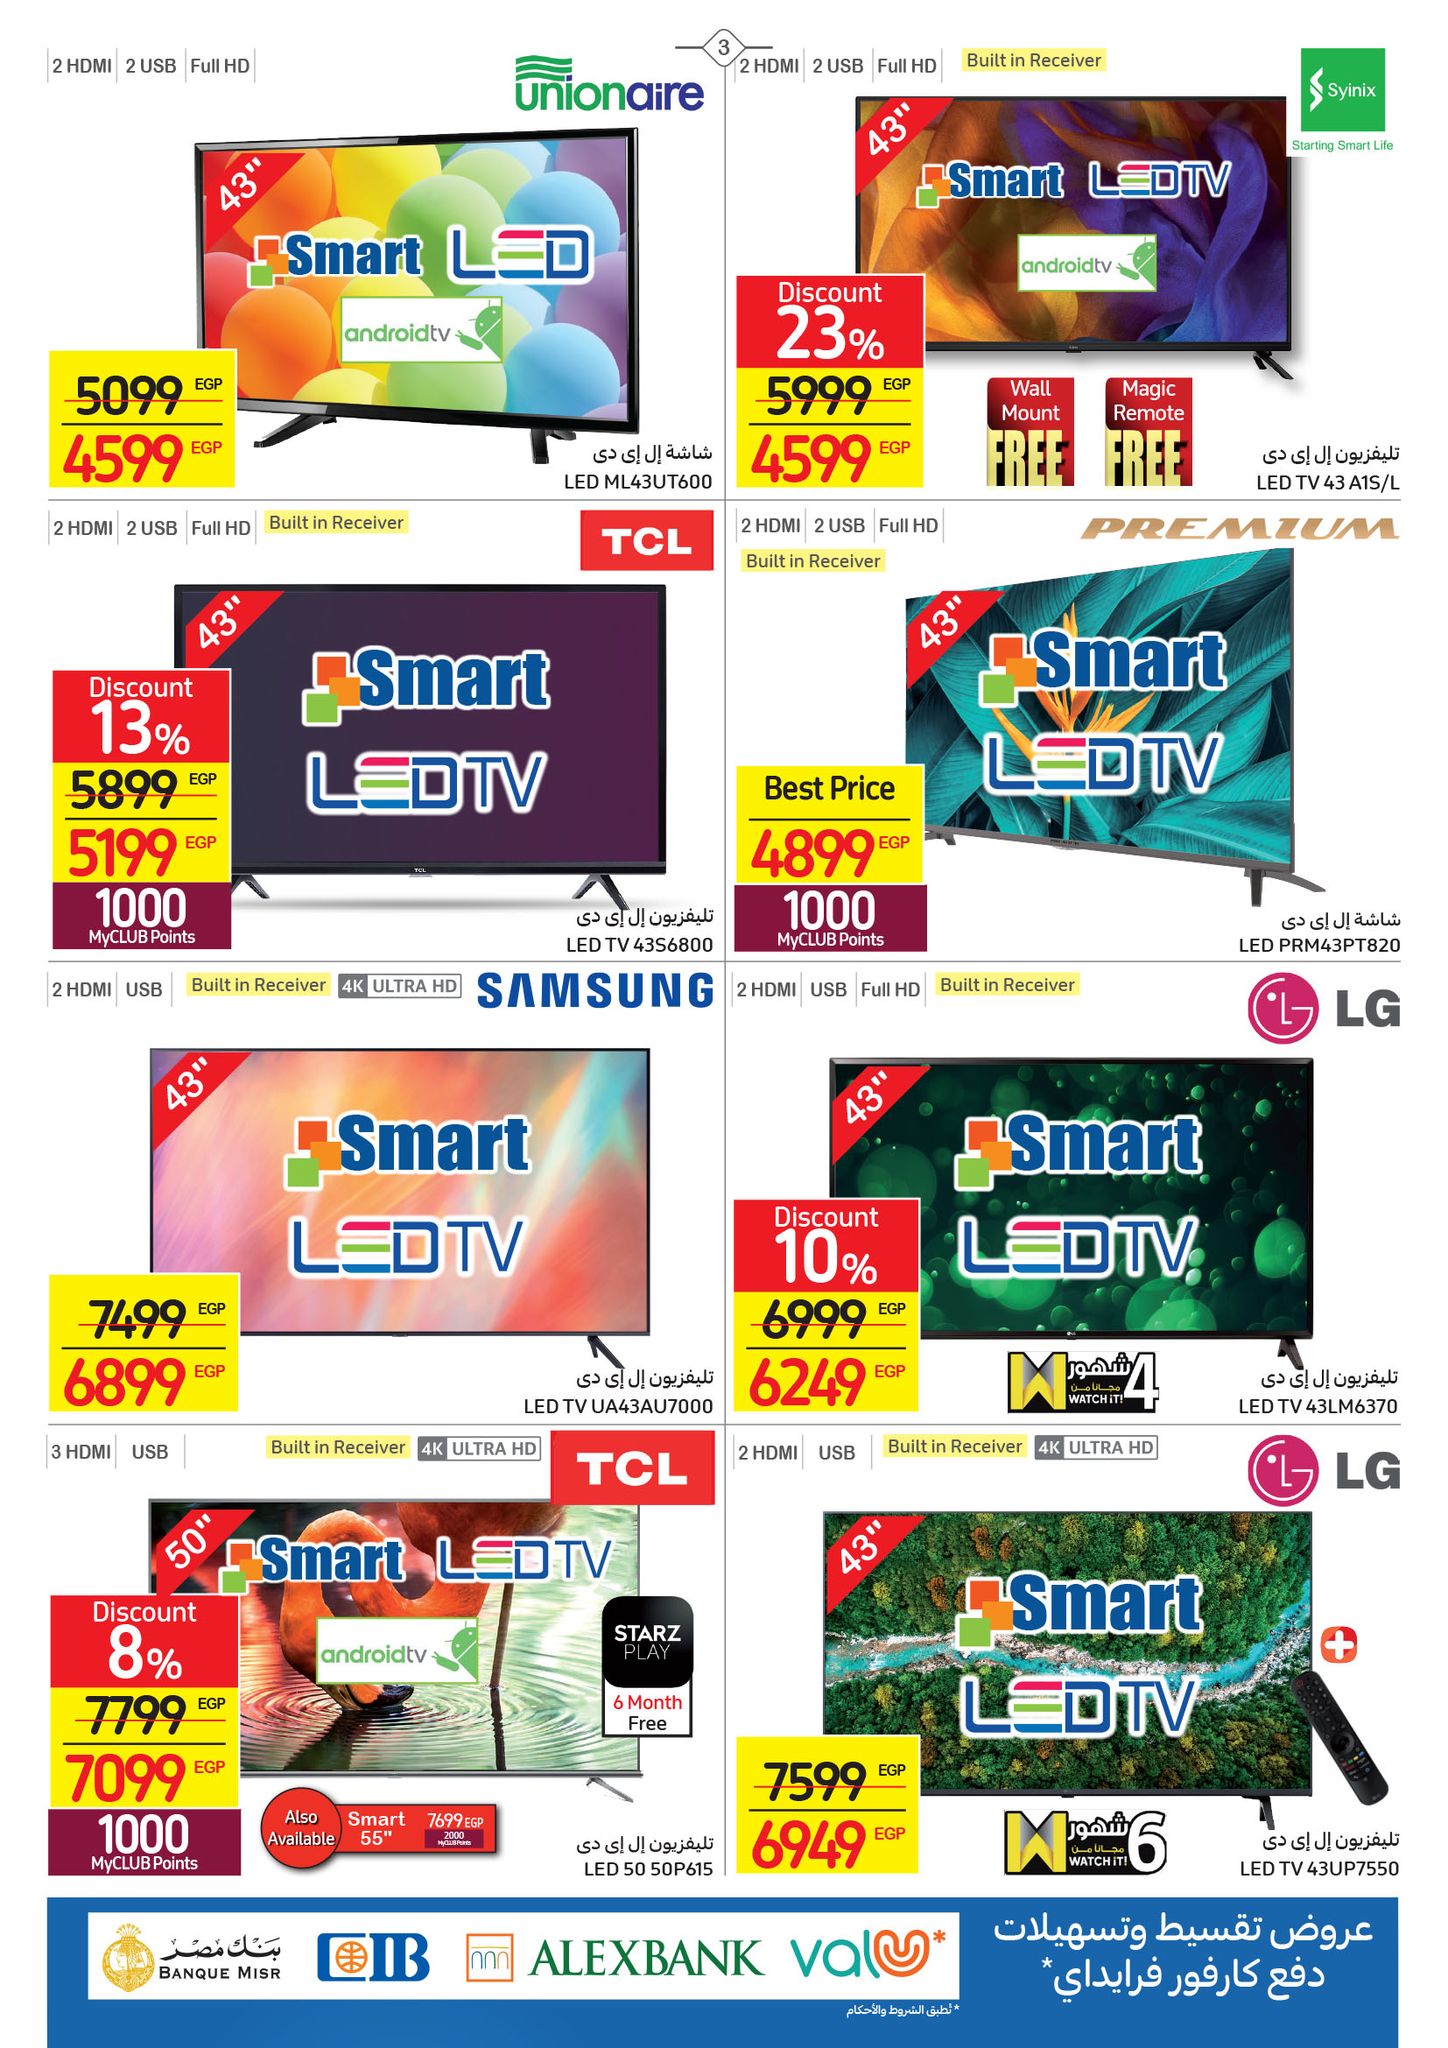 Watch the latest Carrefour half price offers "Last Chance Offer" until December 4 3